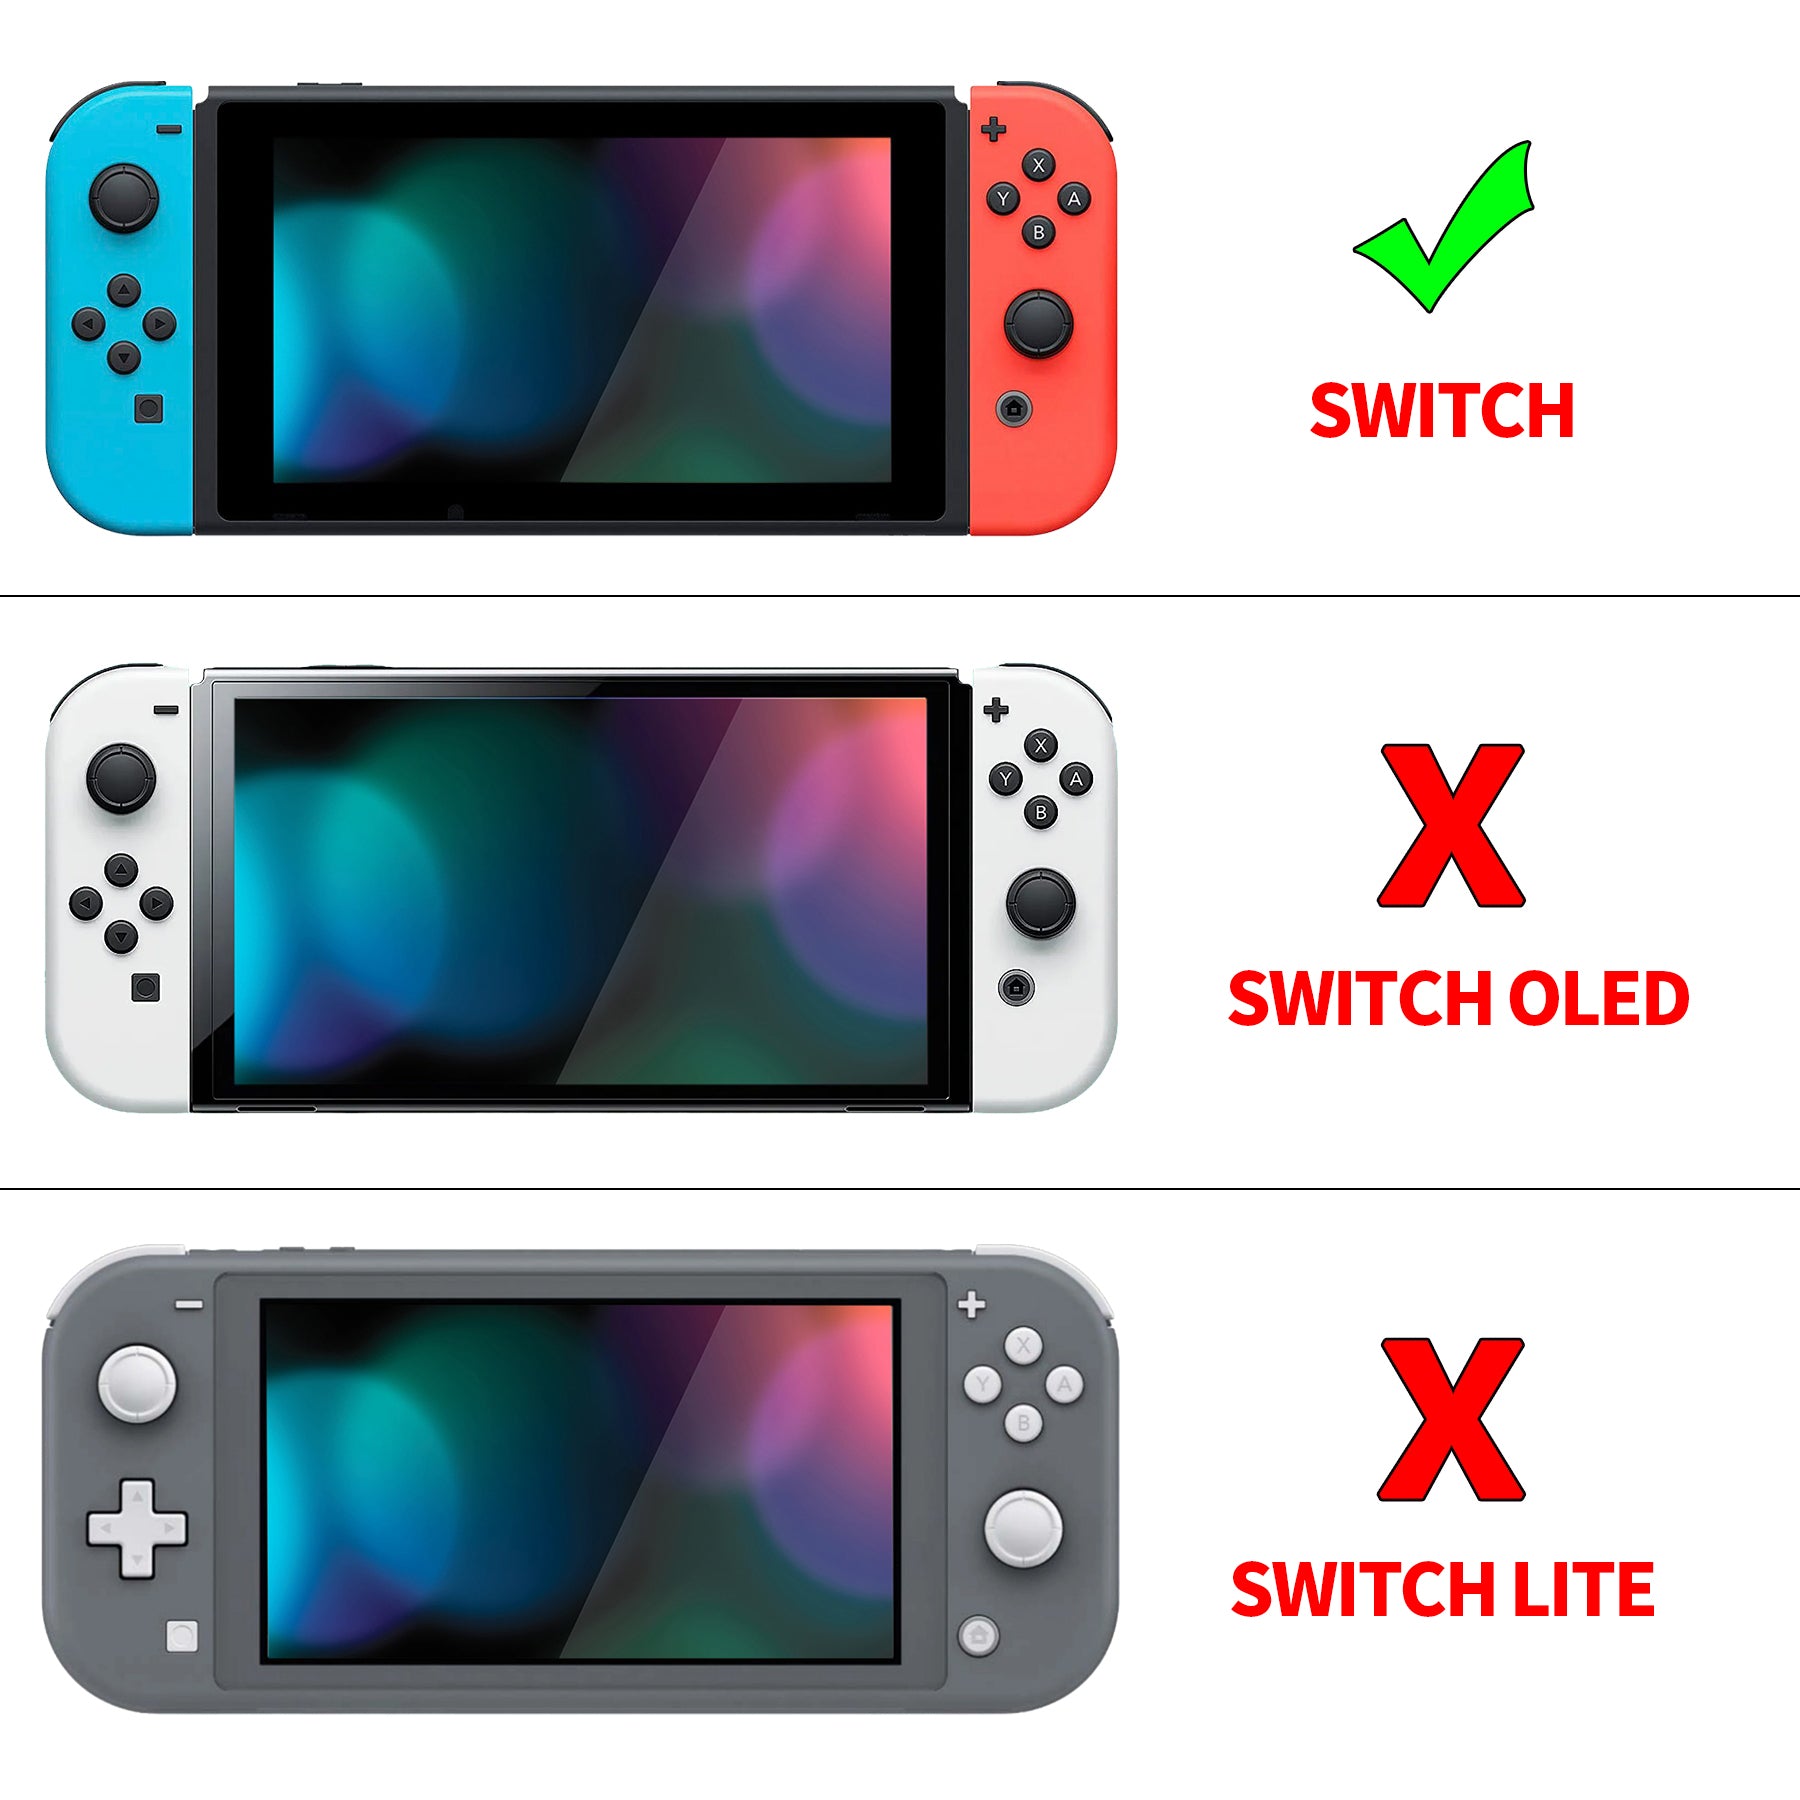 PlayVital Kitten & Chicken Protective Case for NS Switch, Soft TPU Slim Case Cover for NS Switch Joy-Con Console with Colorful ABXY Direction Button Caps - NTU6009 PlayVital